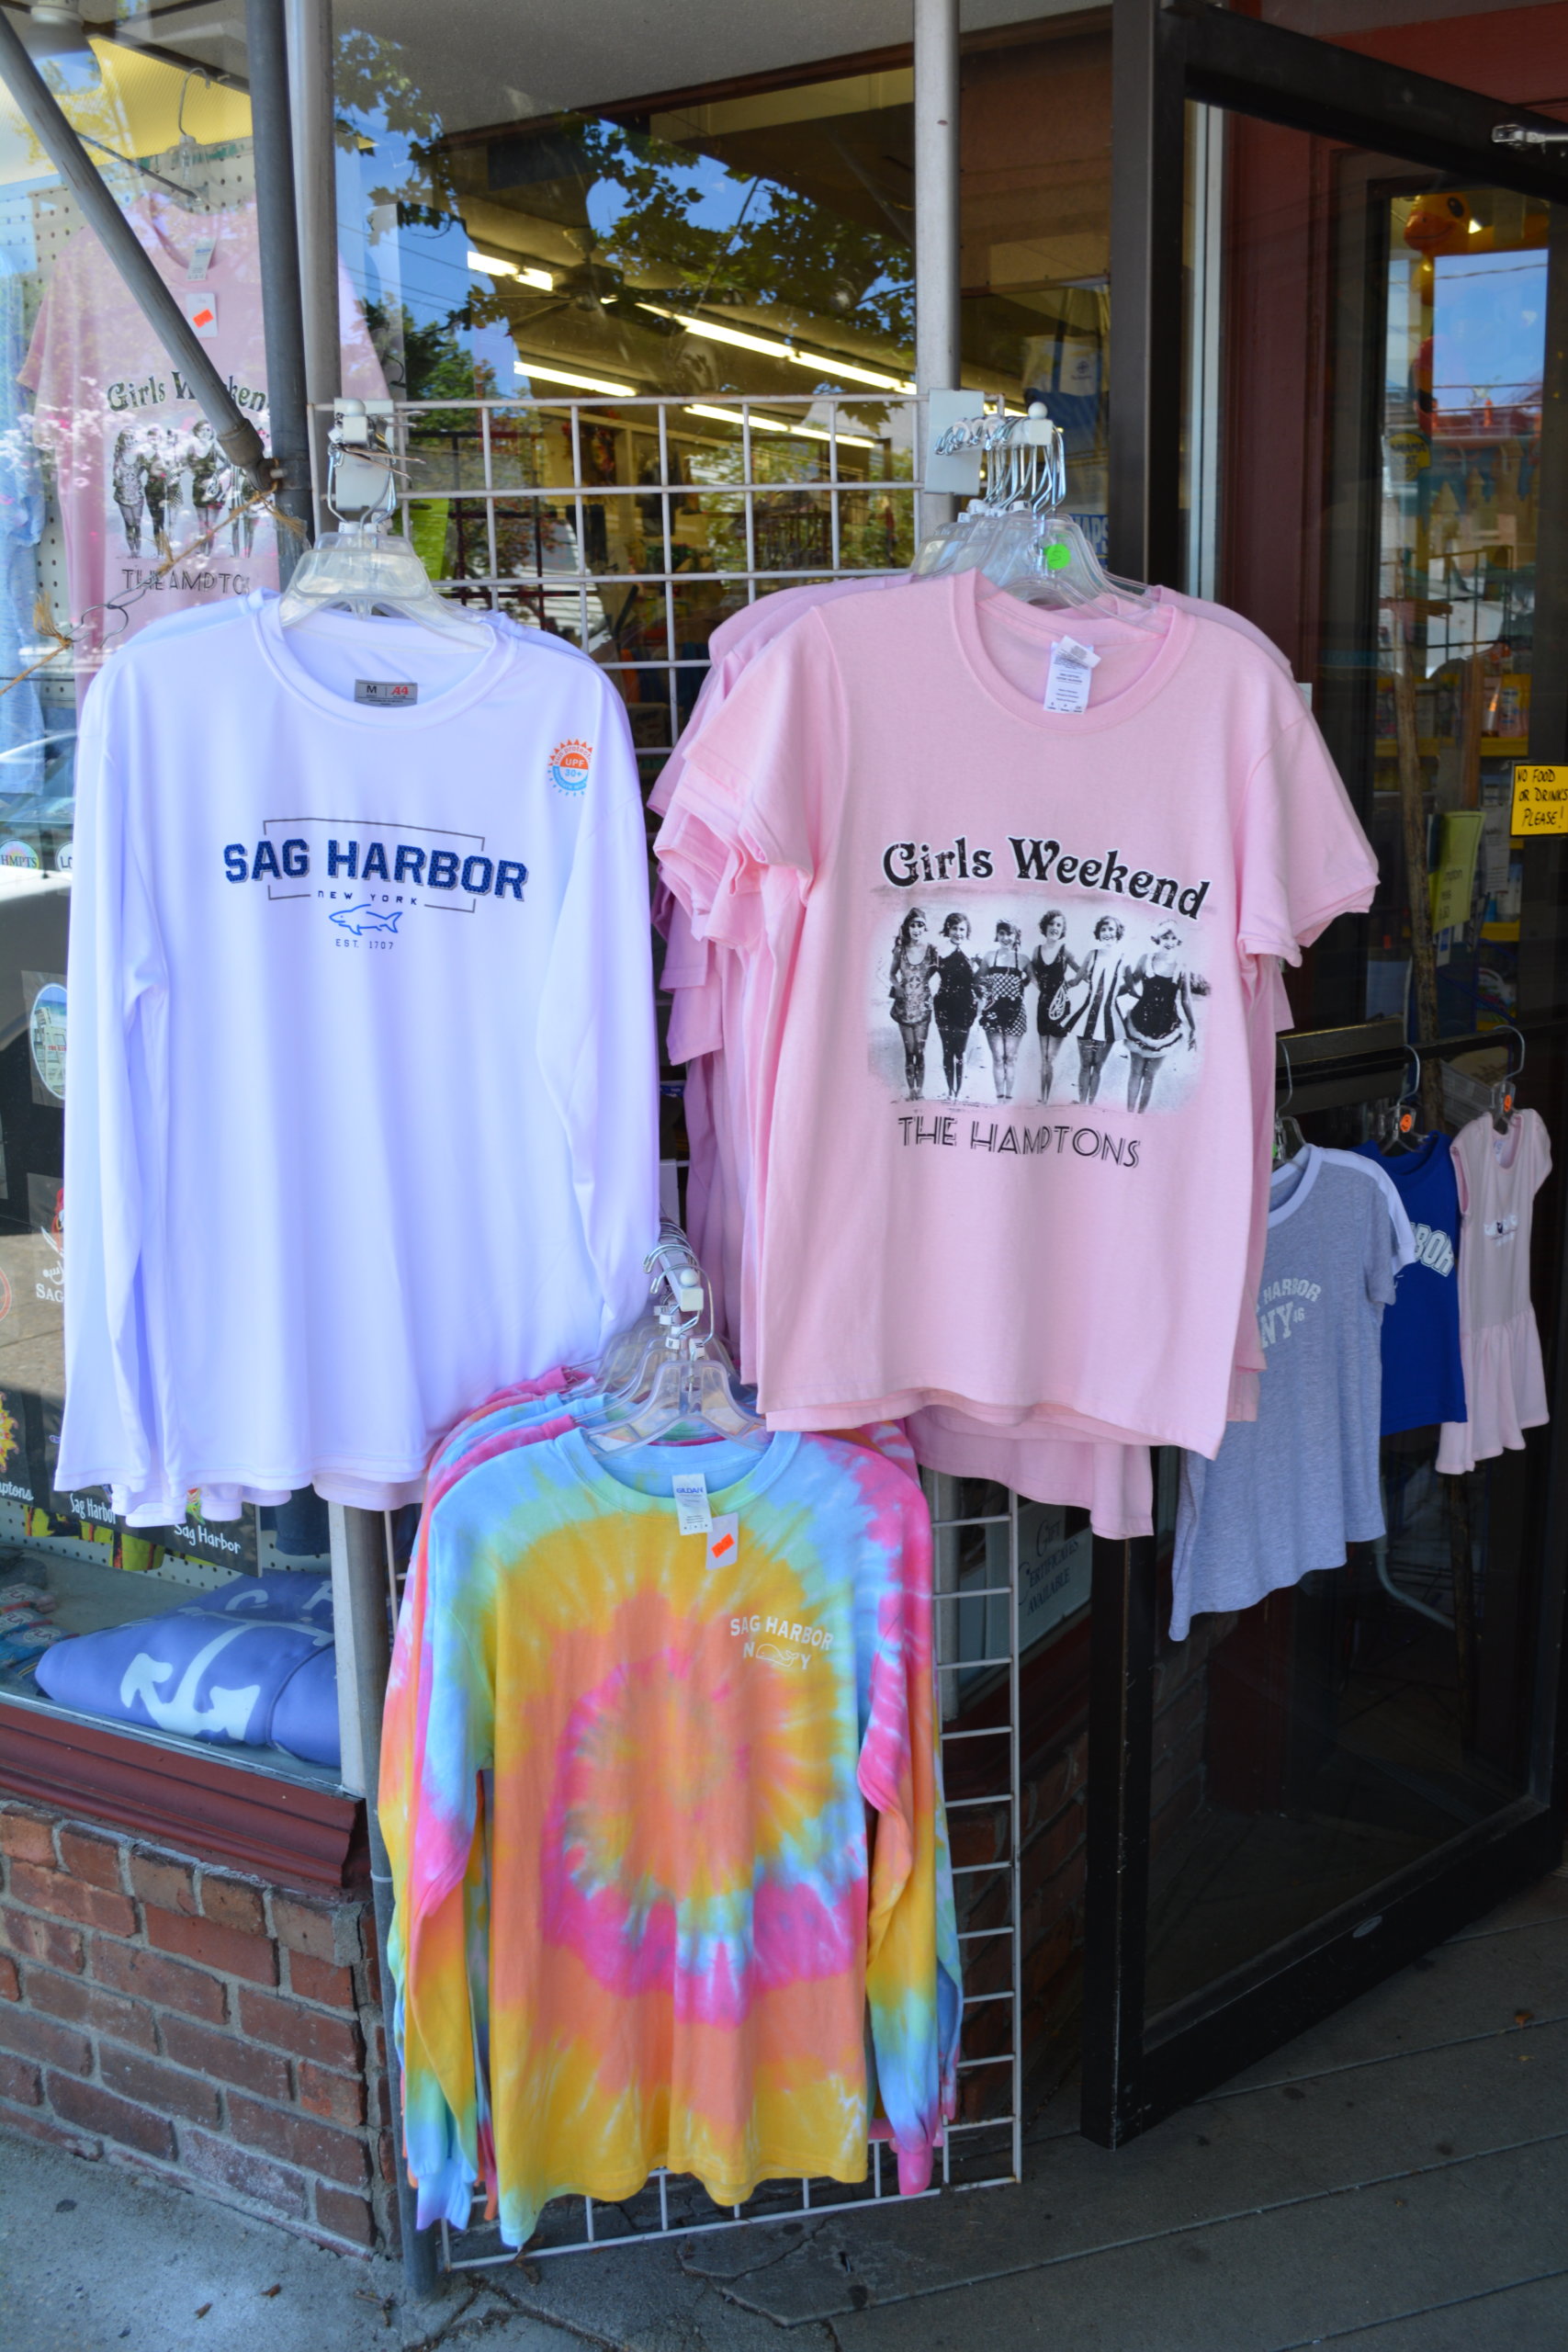 Examples of the many fun, local shirts and other merchandise on offer at the Sag Harbor Variety Store Oliver Peterson